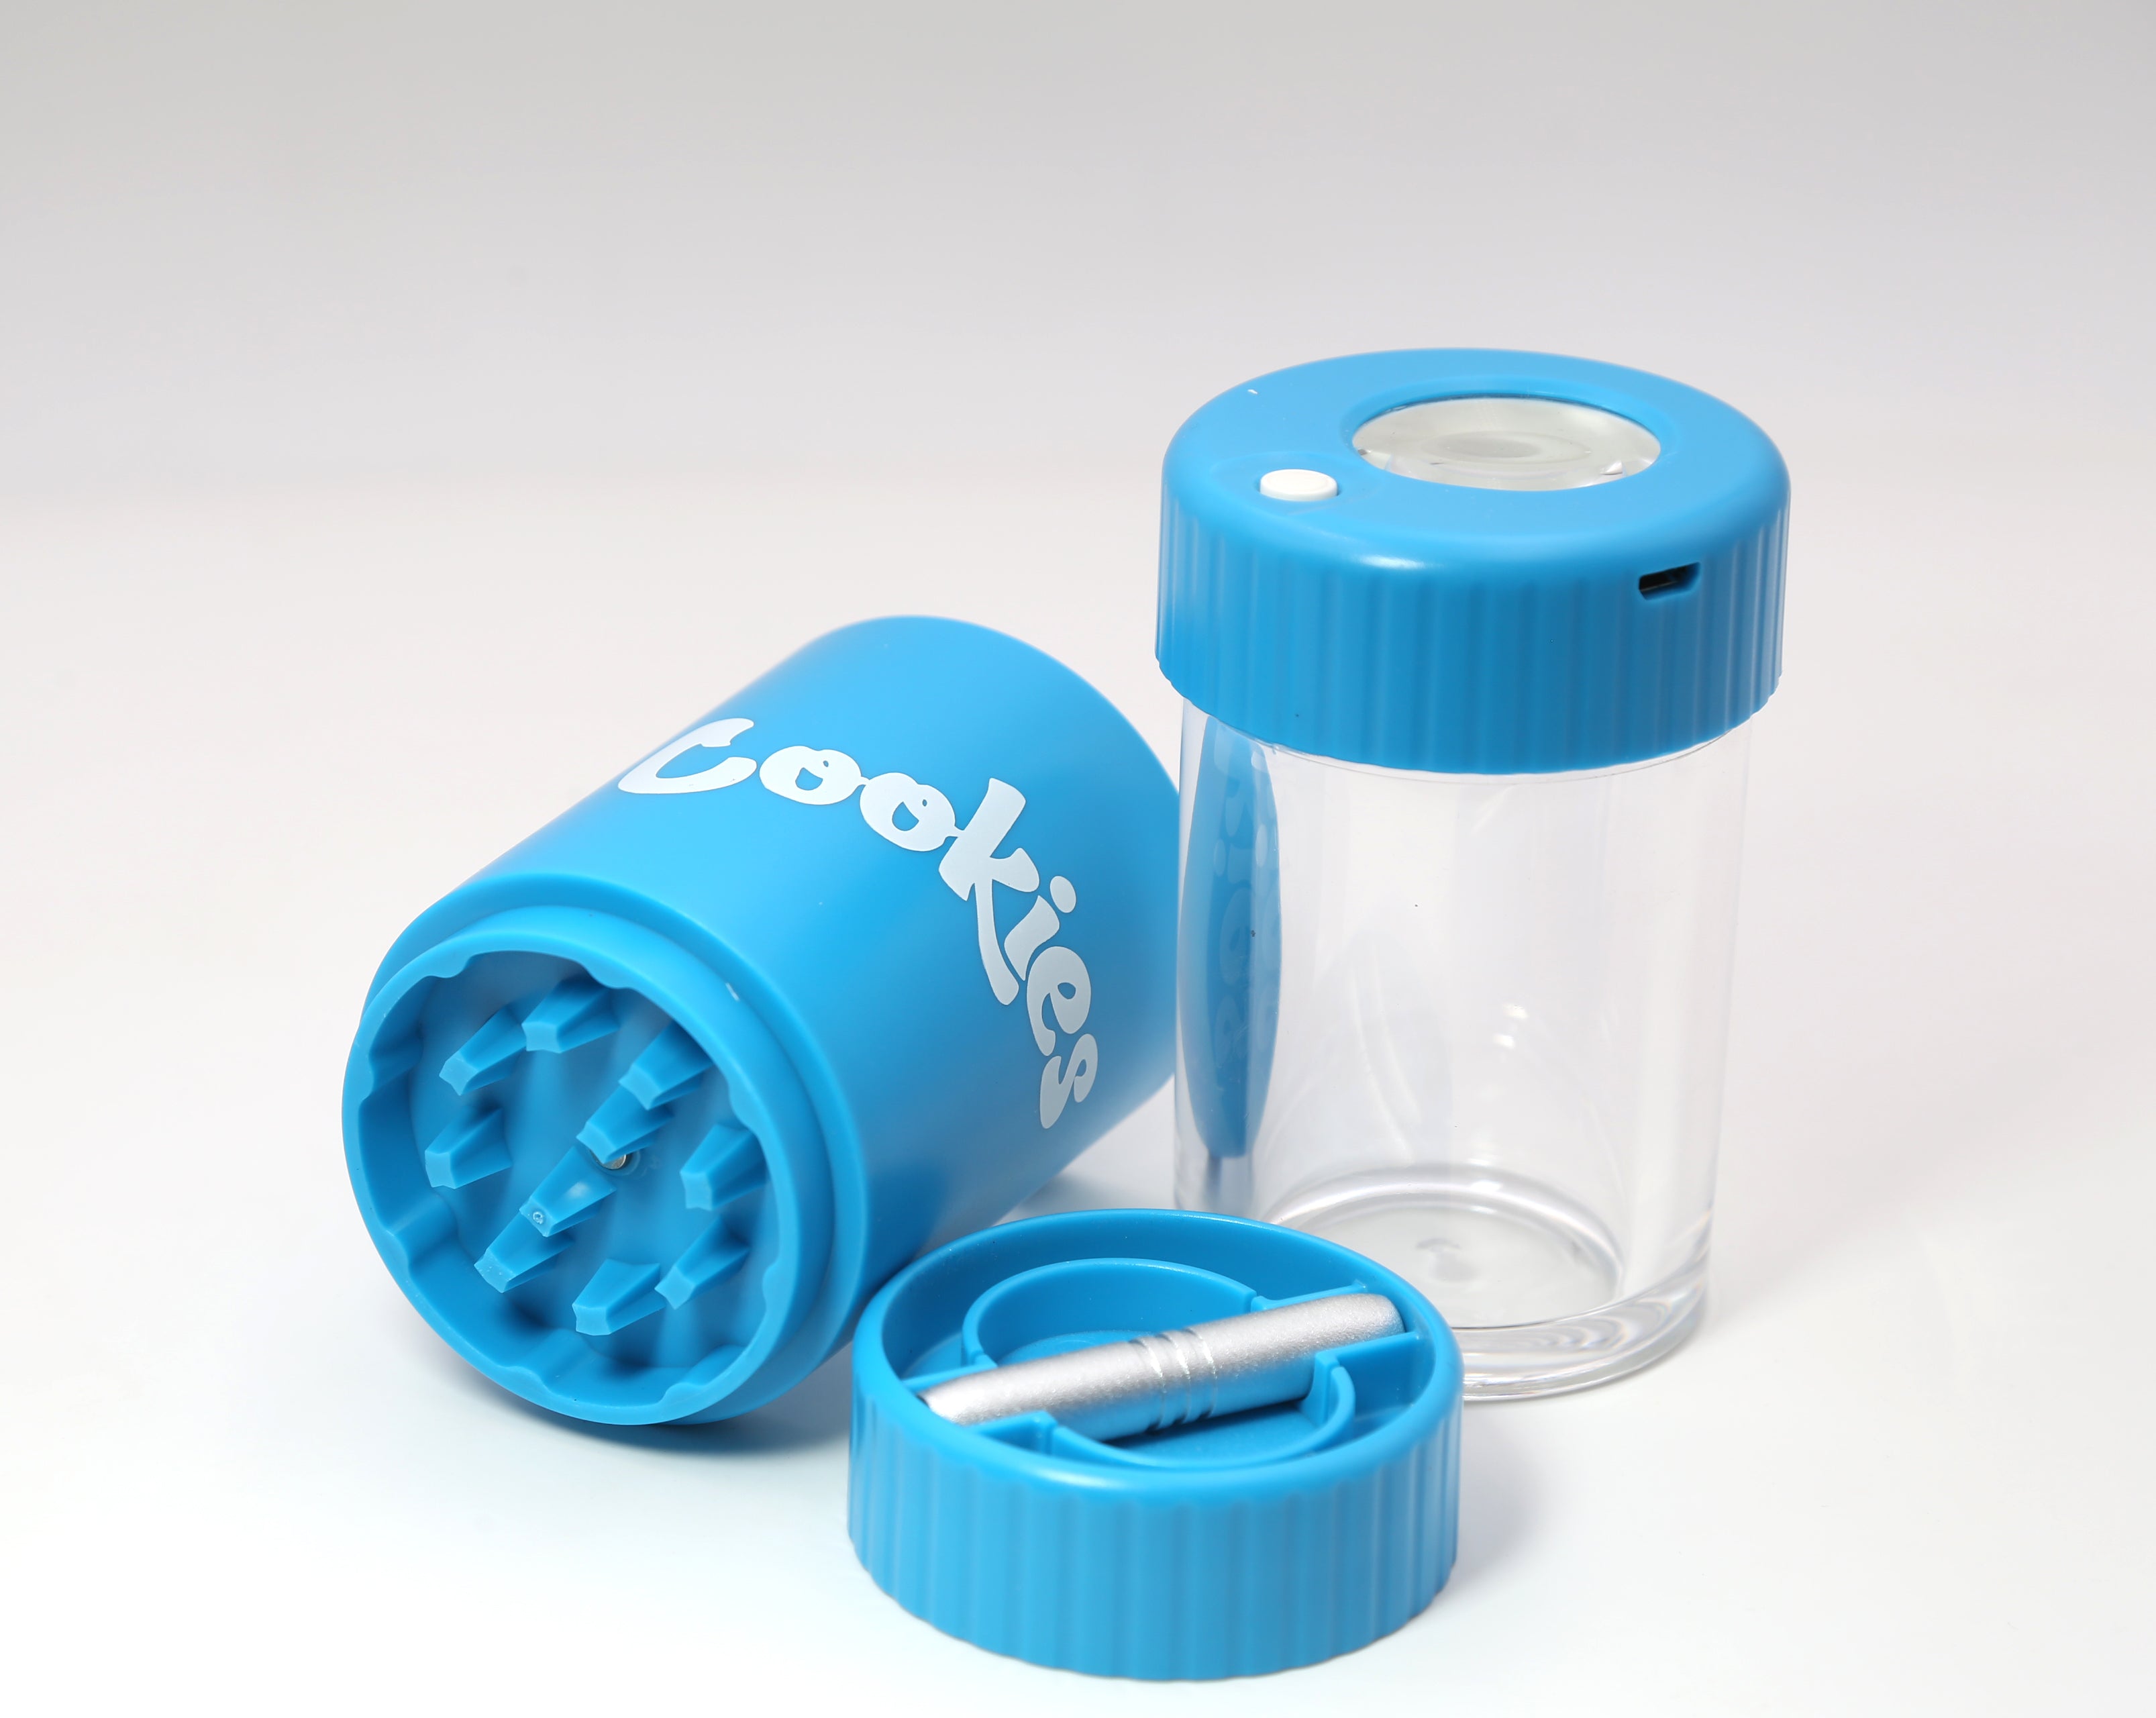 Cookies Mag Jar with Grinder -Airtight storage container led magnifying jar (Blue)